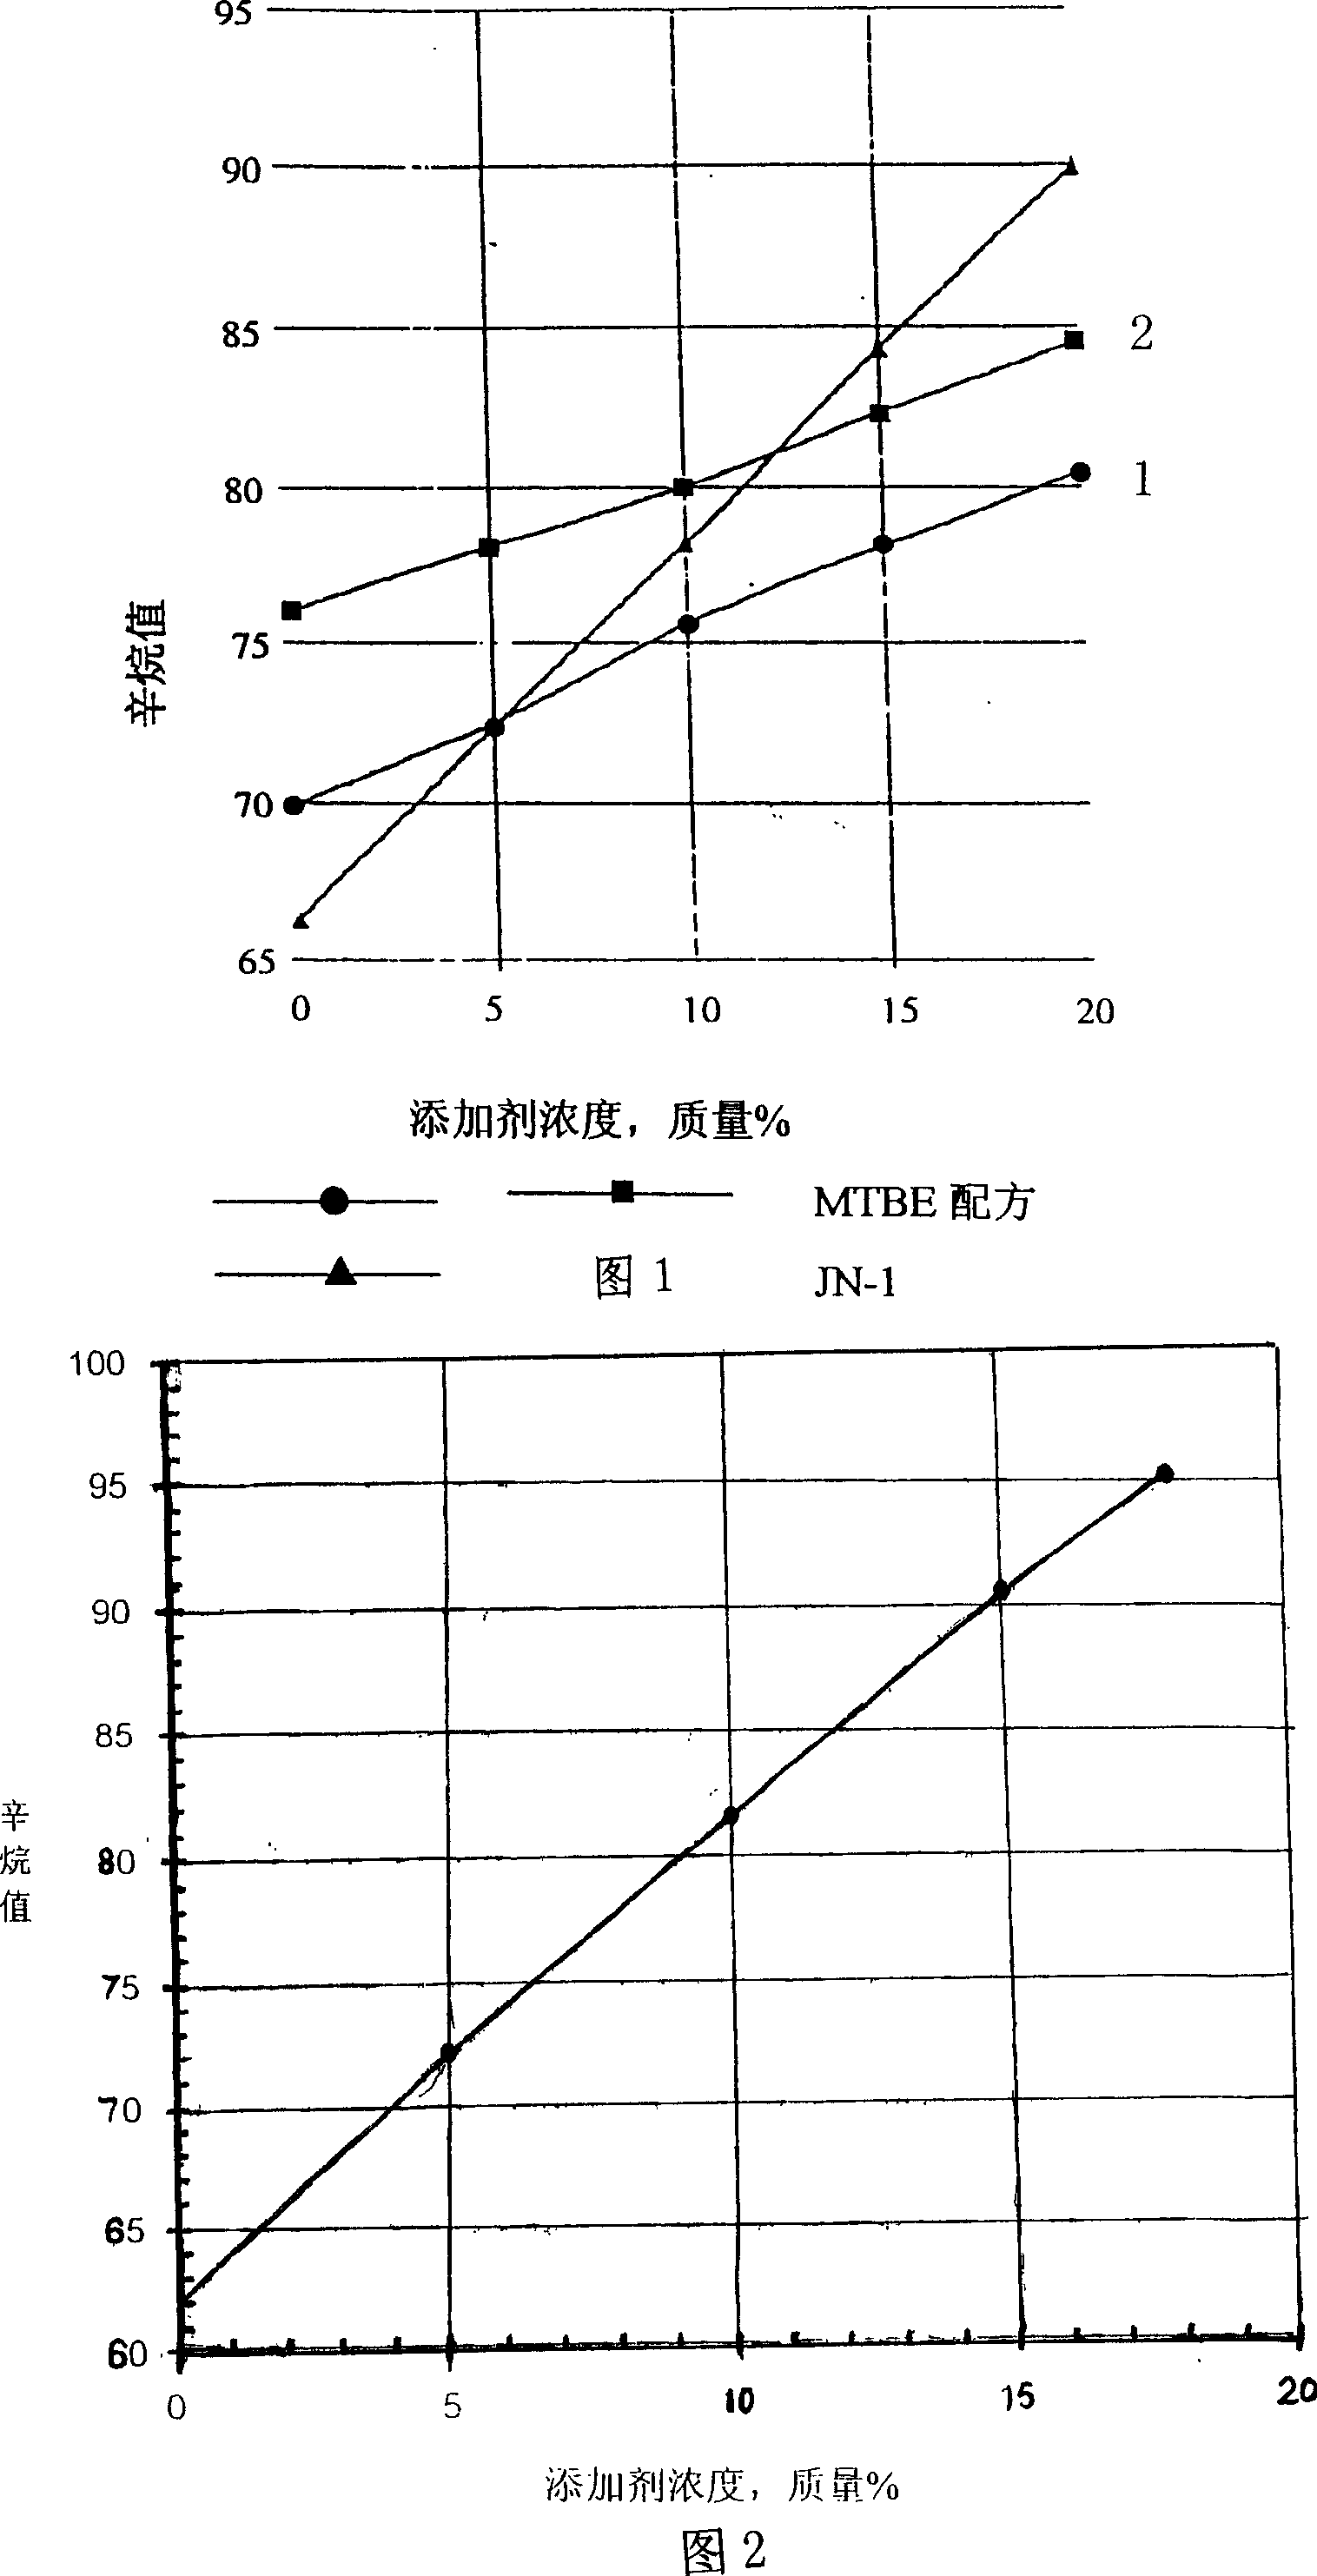 Environment protectional antiknock additive for high-effective and clean gasoline for vehicle, and method for manufacturing same